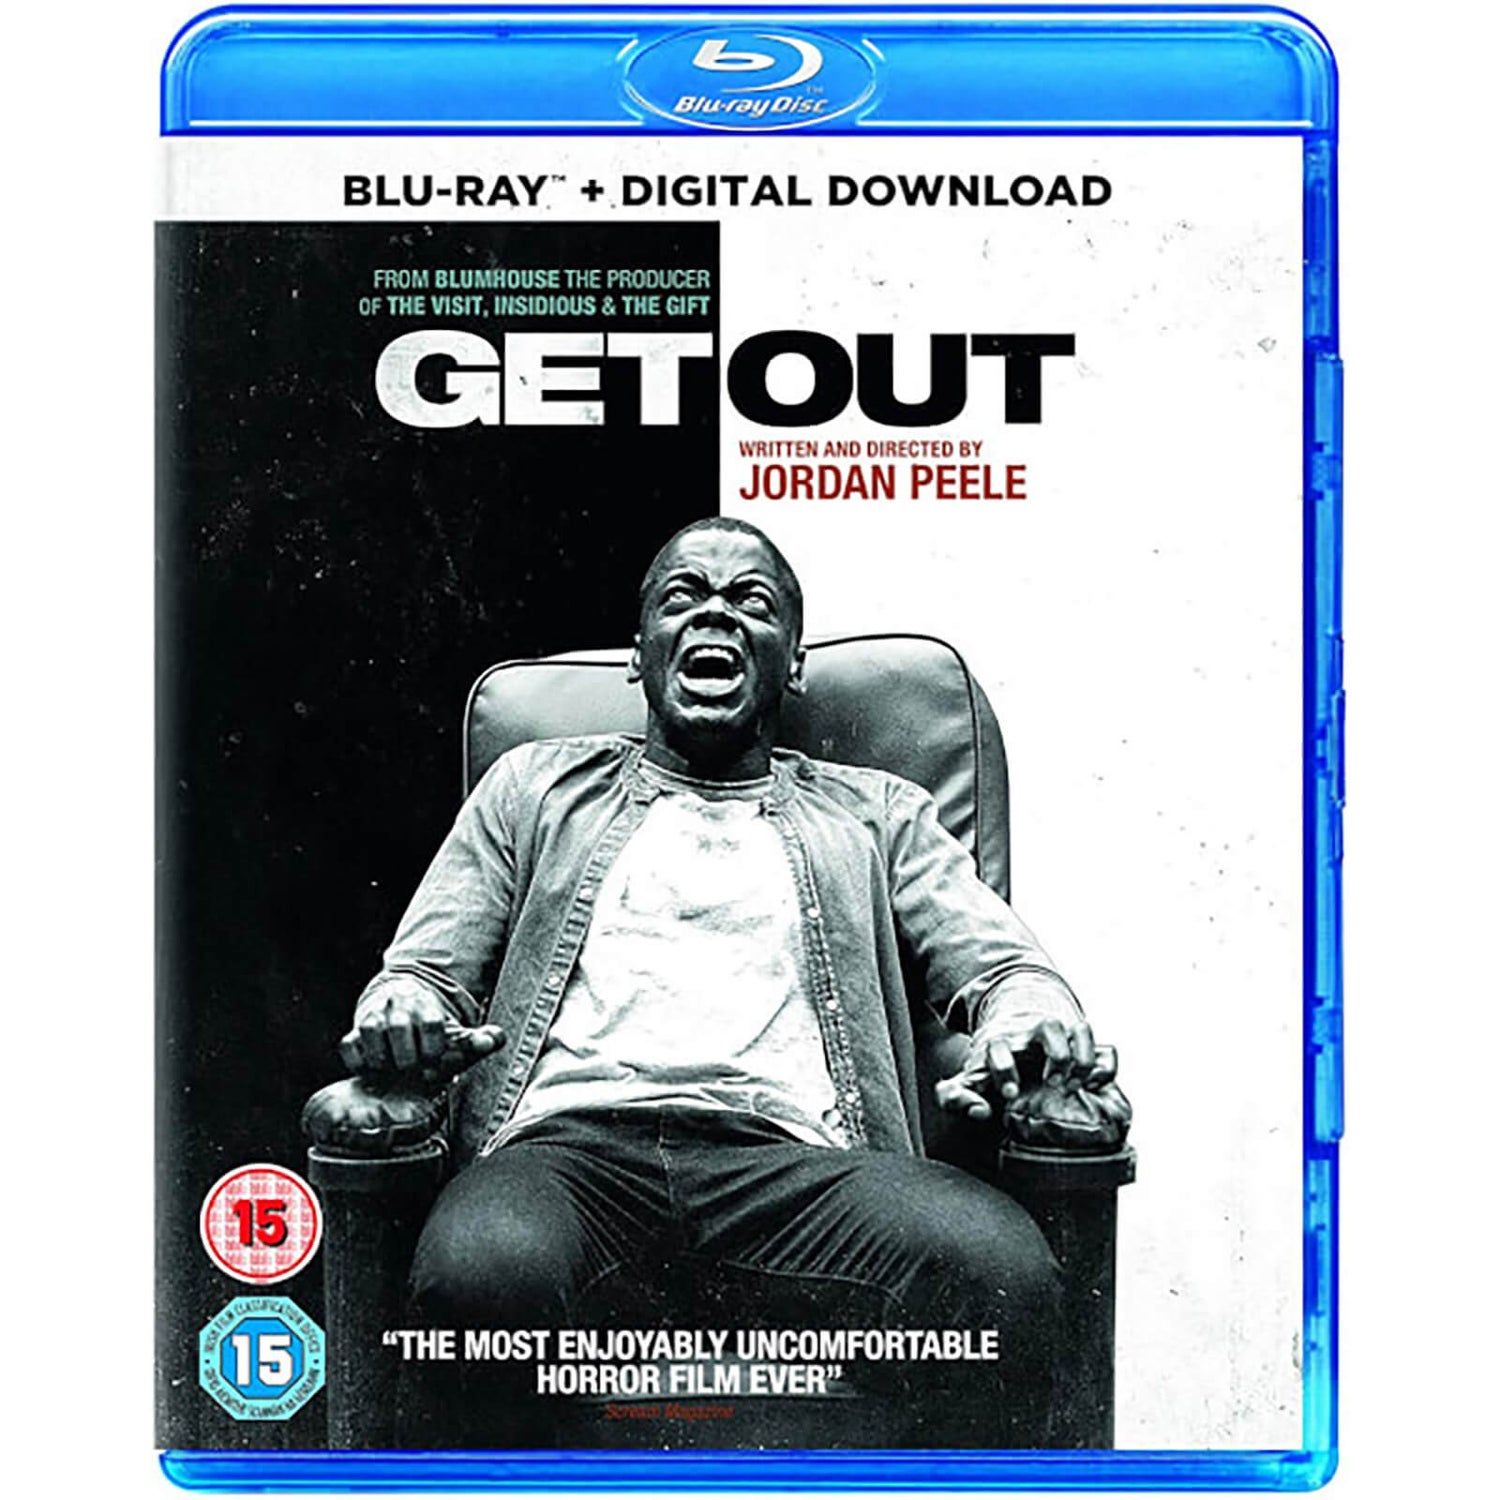 Get Out (Includes Digital Download)